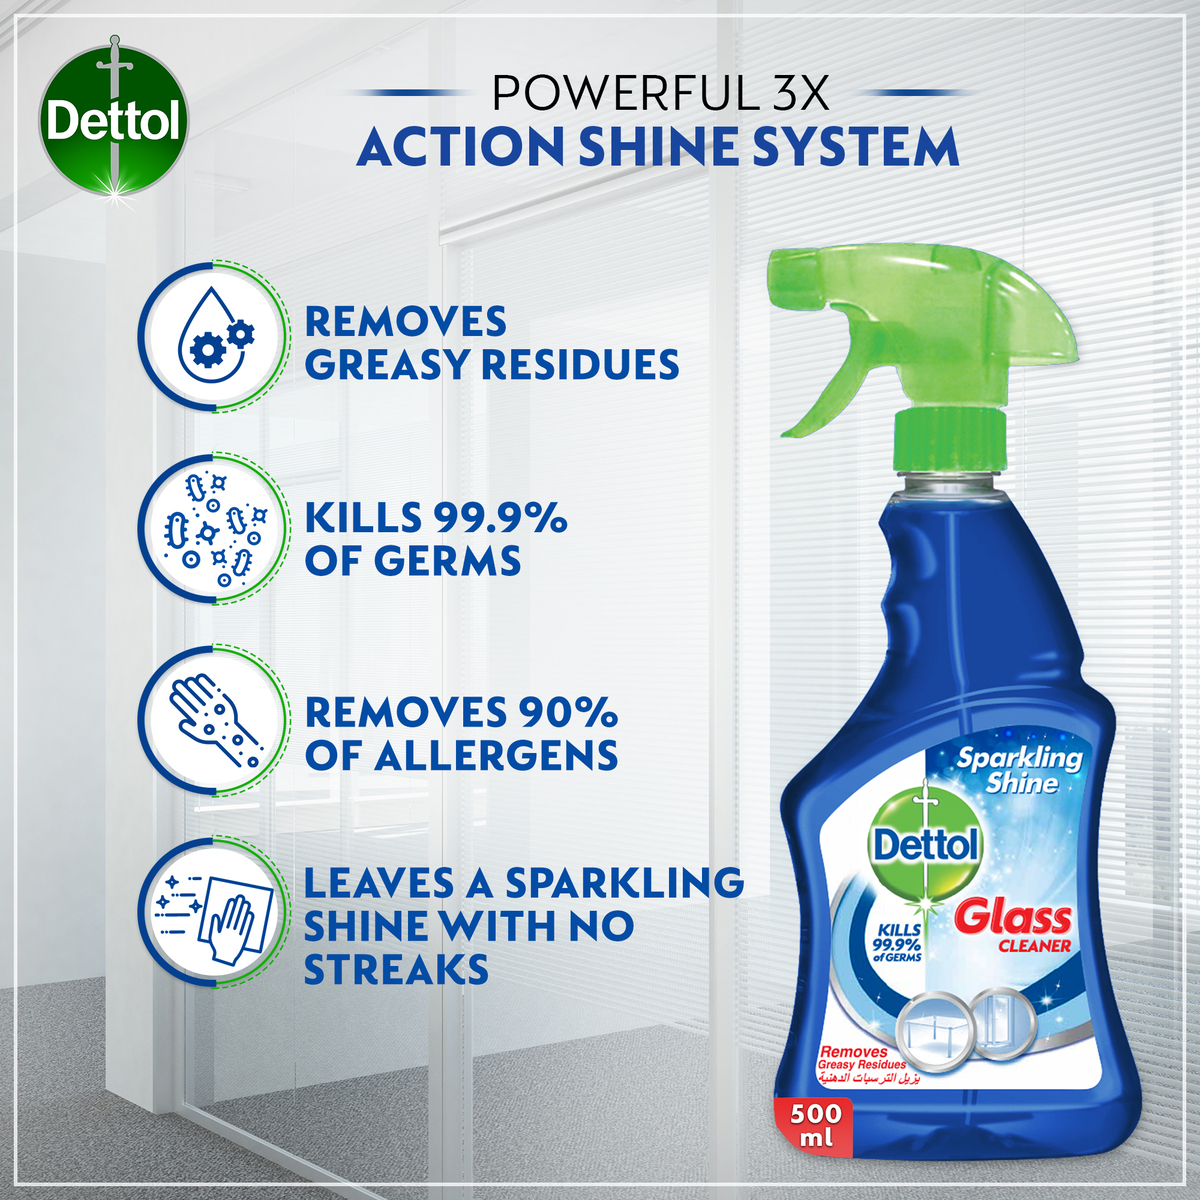 Dettol Healthy Glass Cleaner 500 ml